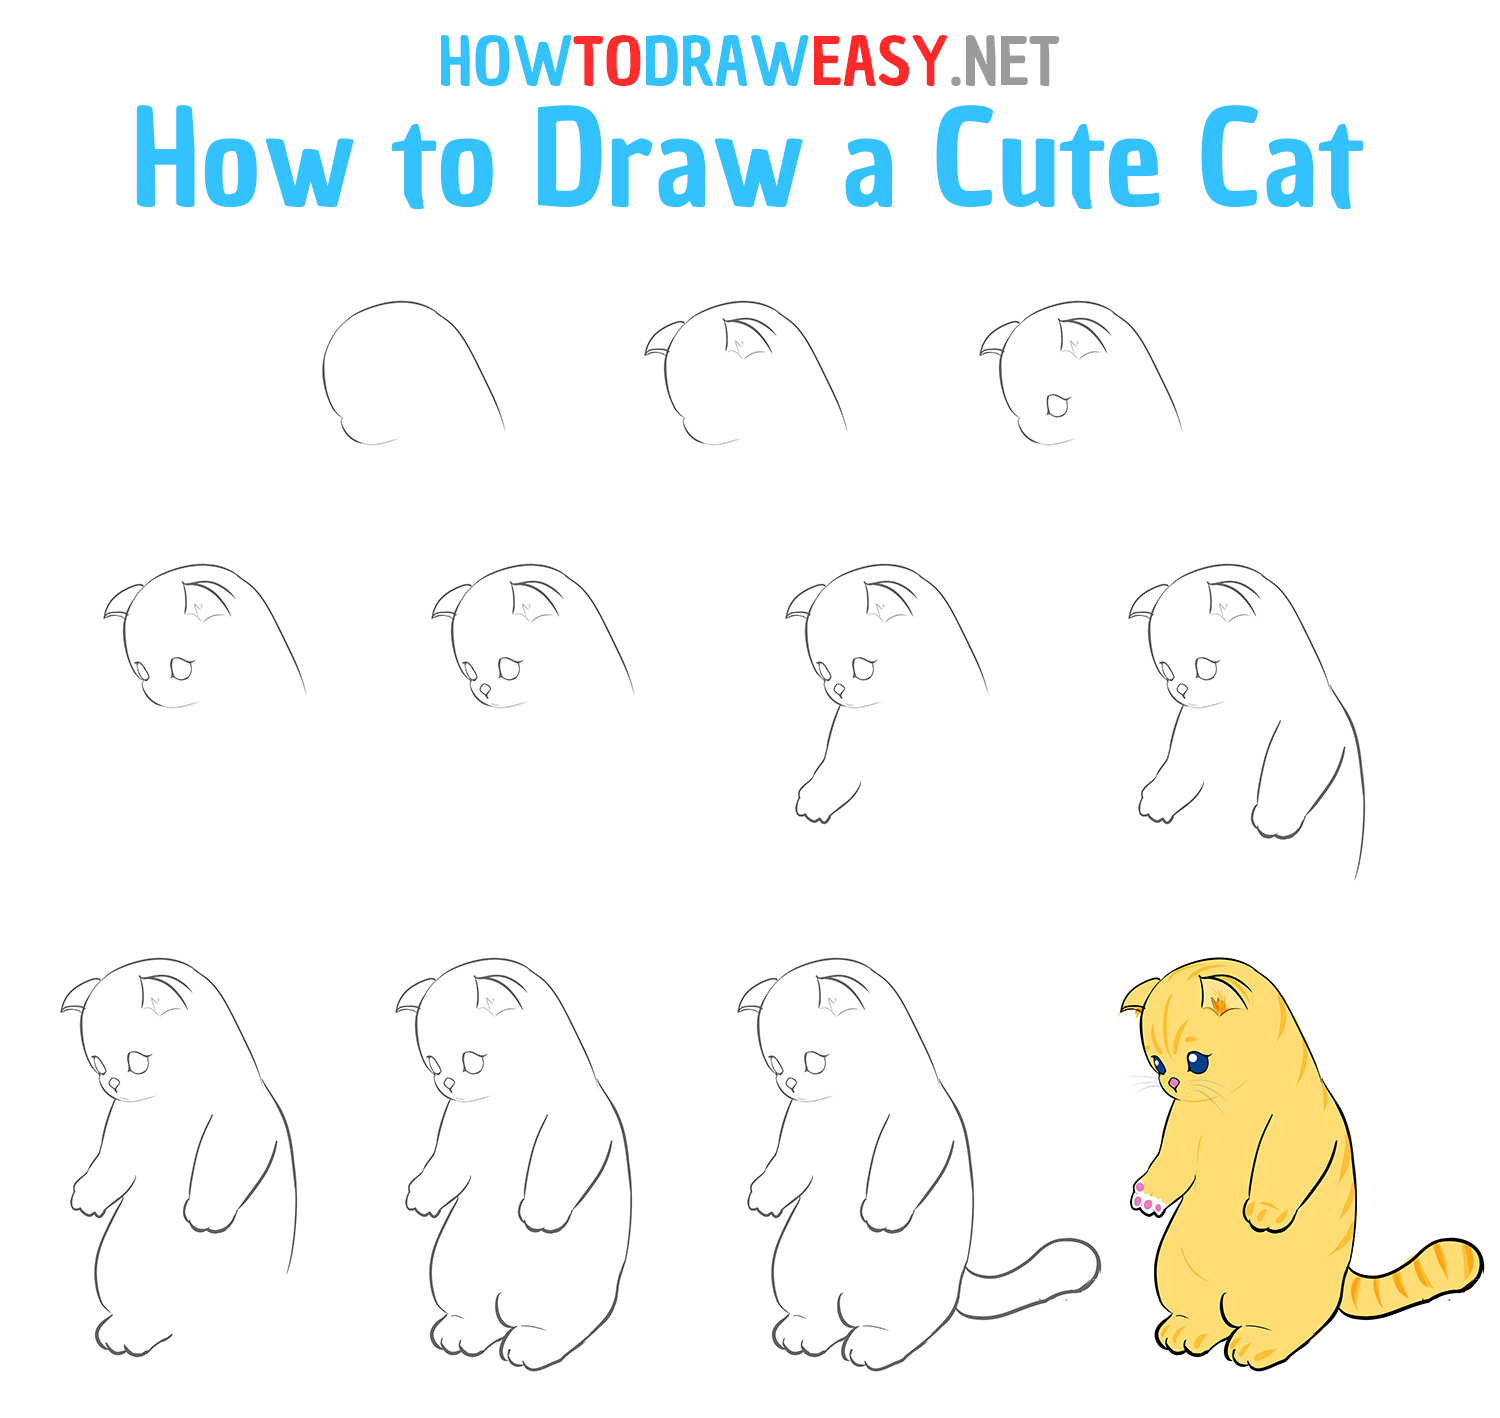 How to Draw a Cute Cat Step by Step